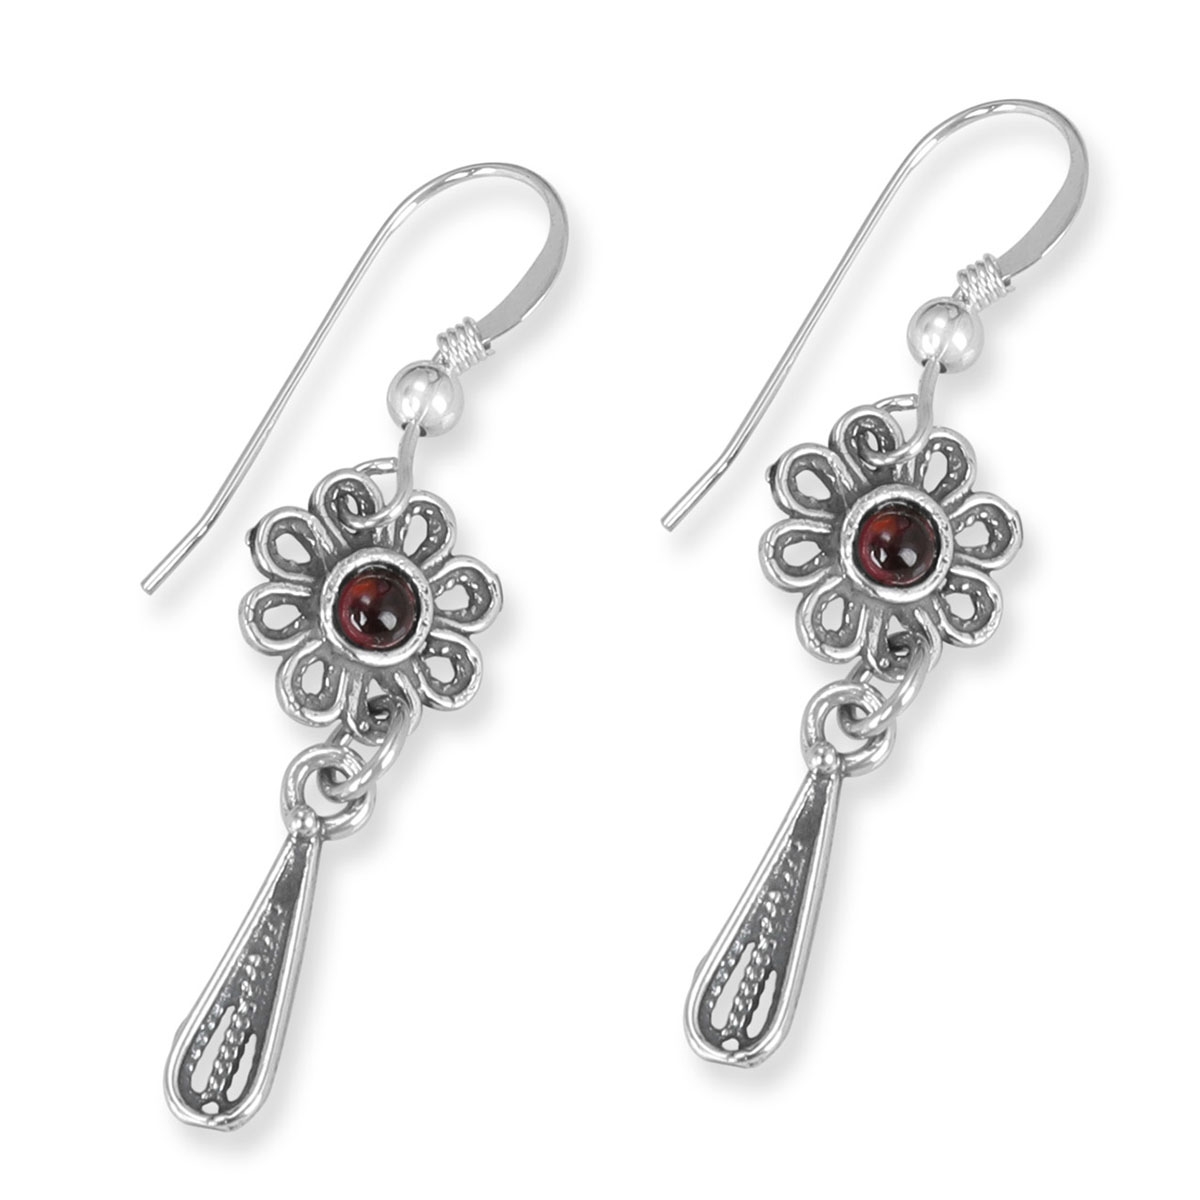 Traditional Yemenite Art Handcrafted Sterling Silver Flower and Teardrop Earrings With Indian Garnet Stones - 1